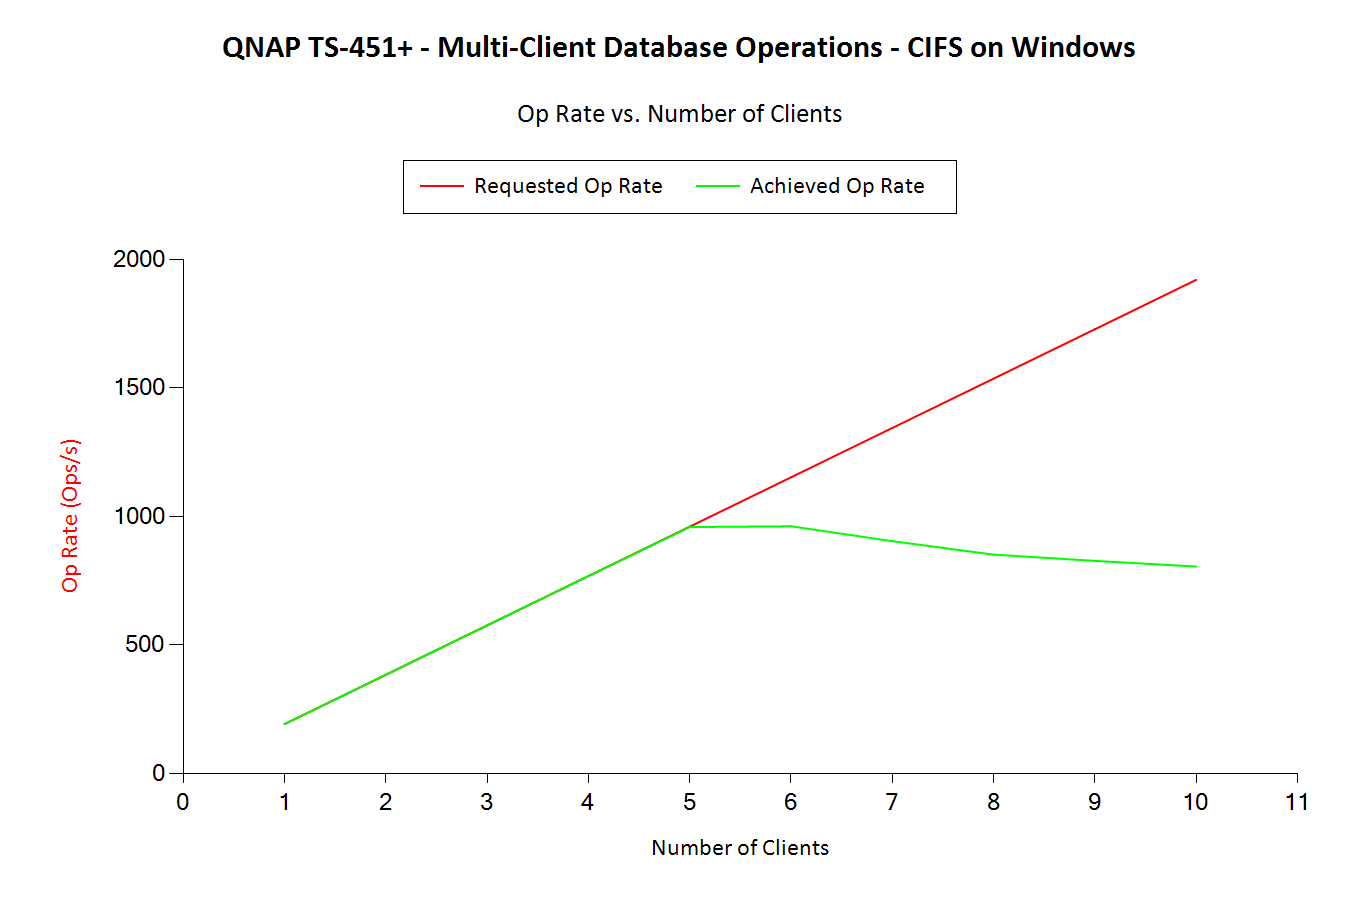 Database Operations - Op Rates